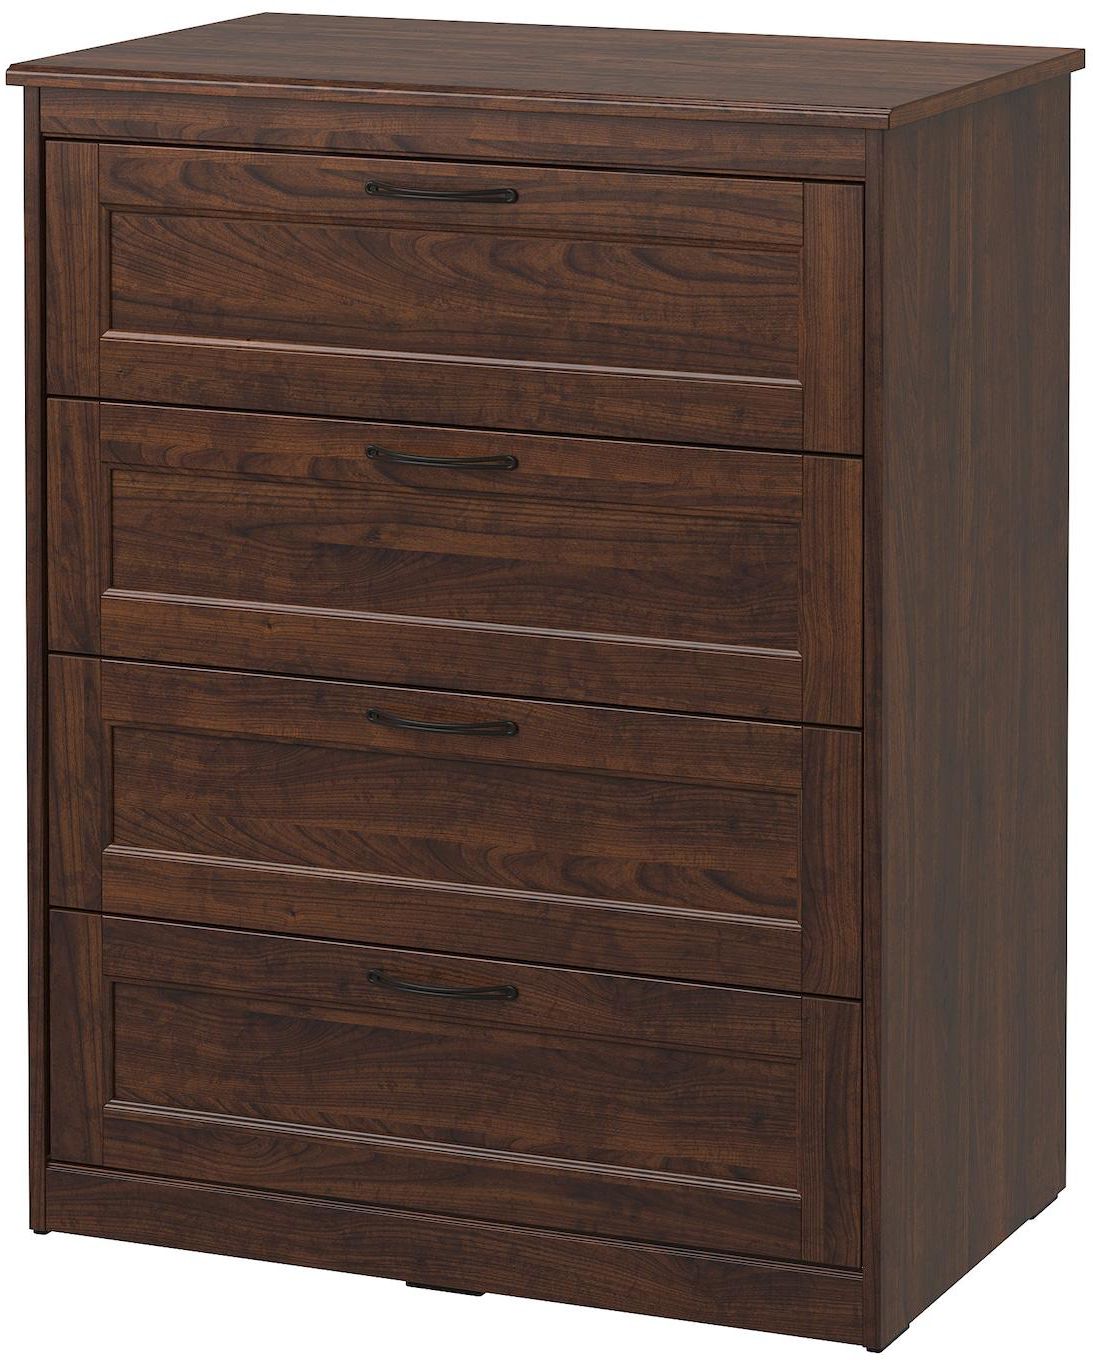 SONGESAND Chest of 4 drawers - brown 82x104 cm